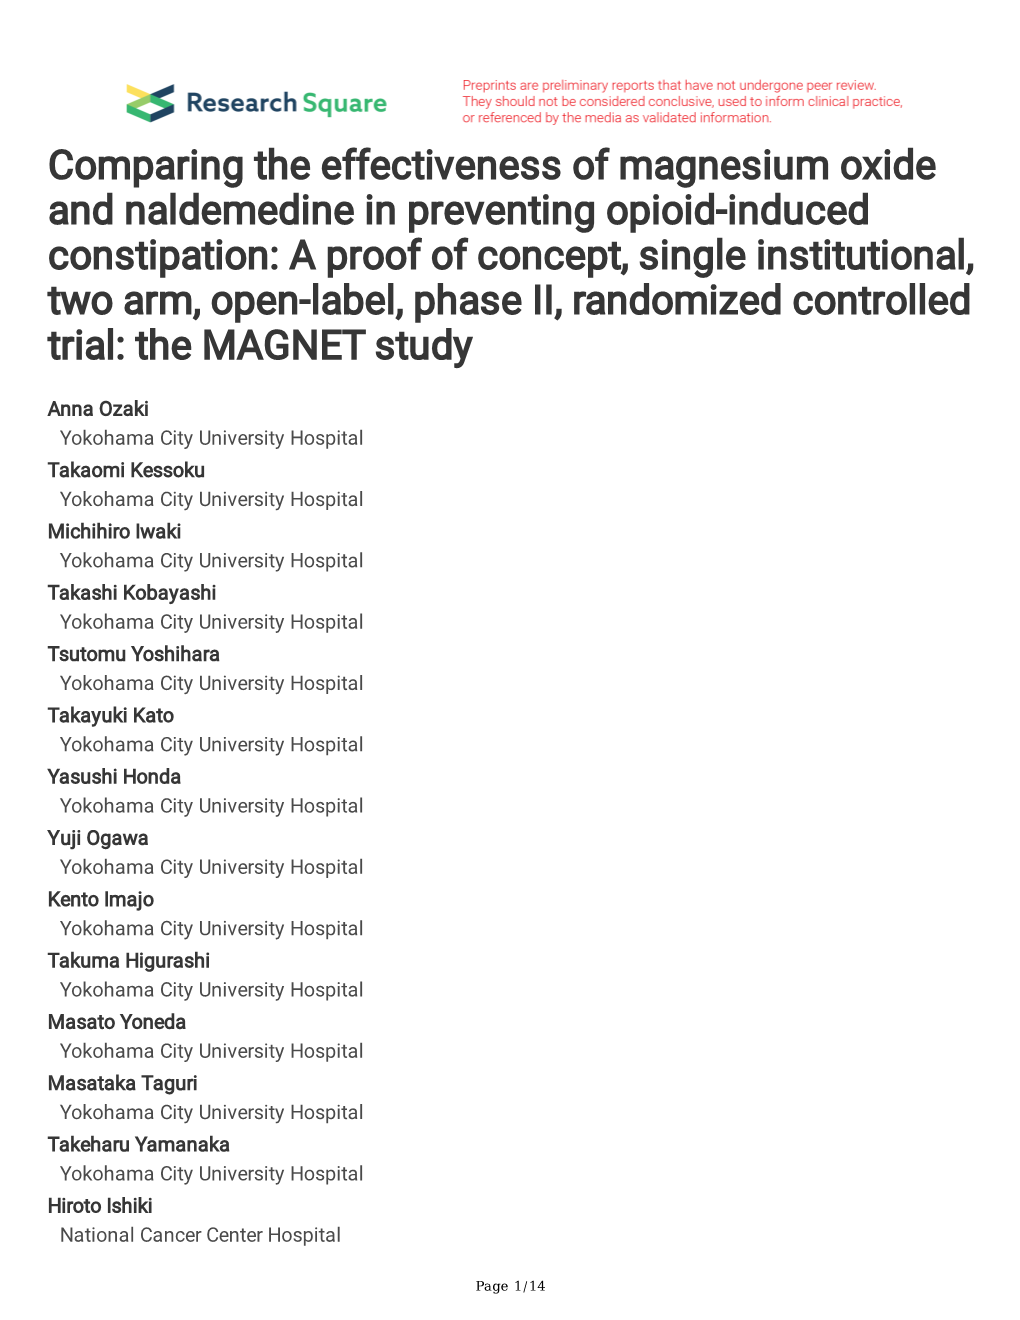 Comparing the Effectiveness of Magnesium Oxide and Naldemedine in Preventing Opioid-Induced Constipation